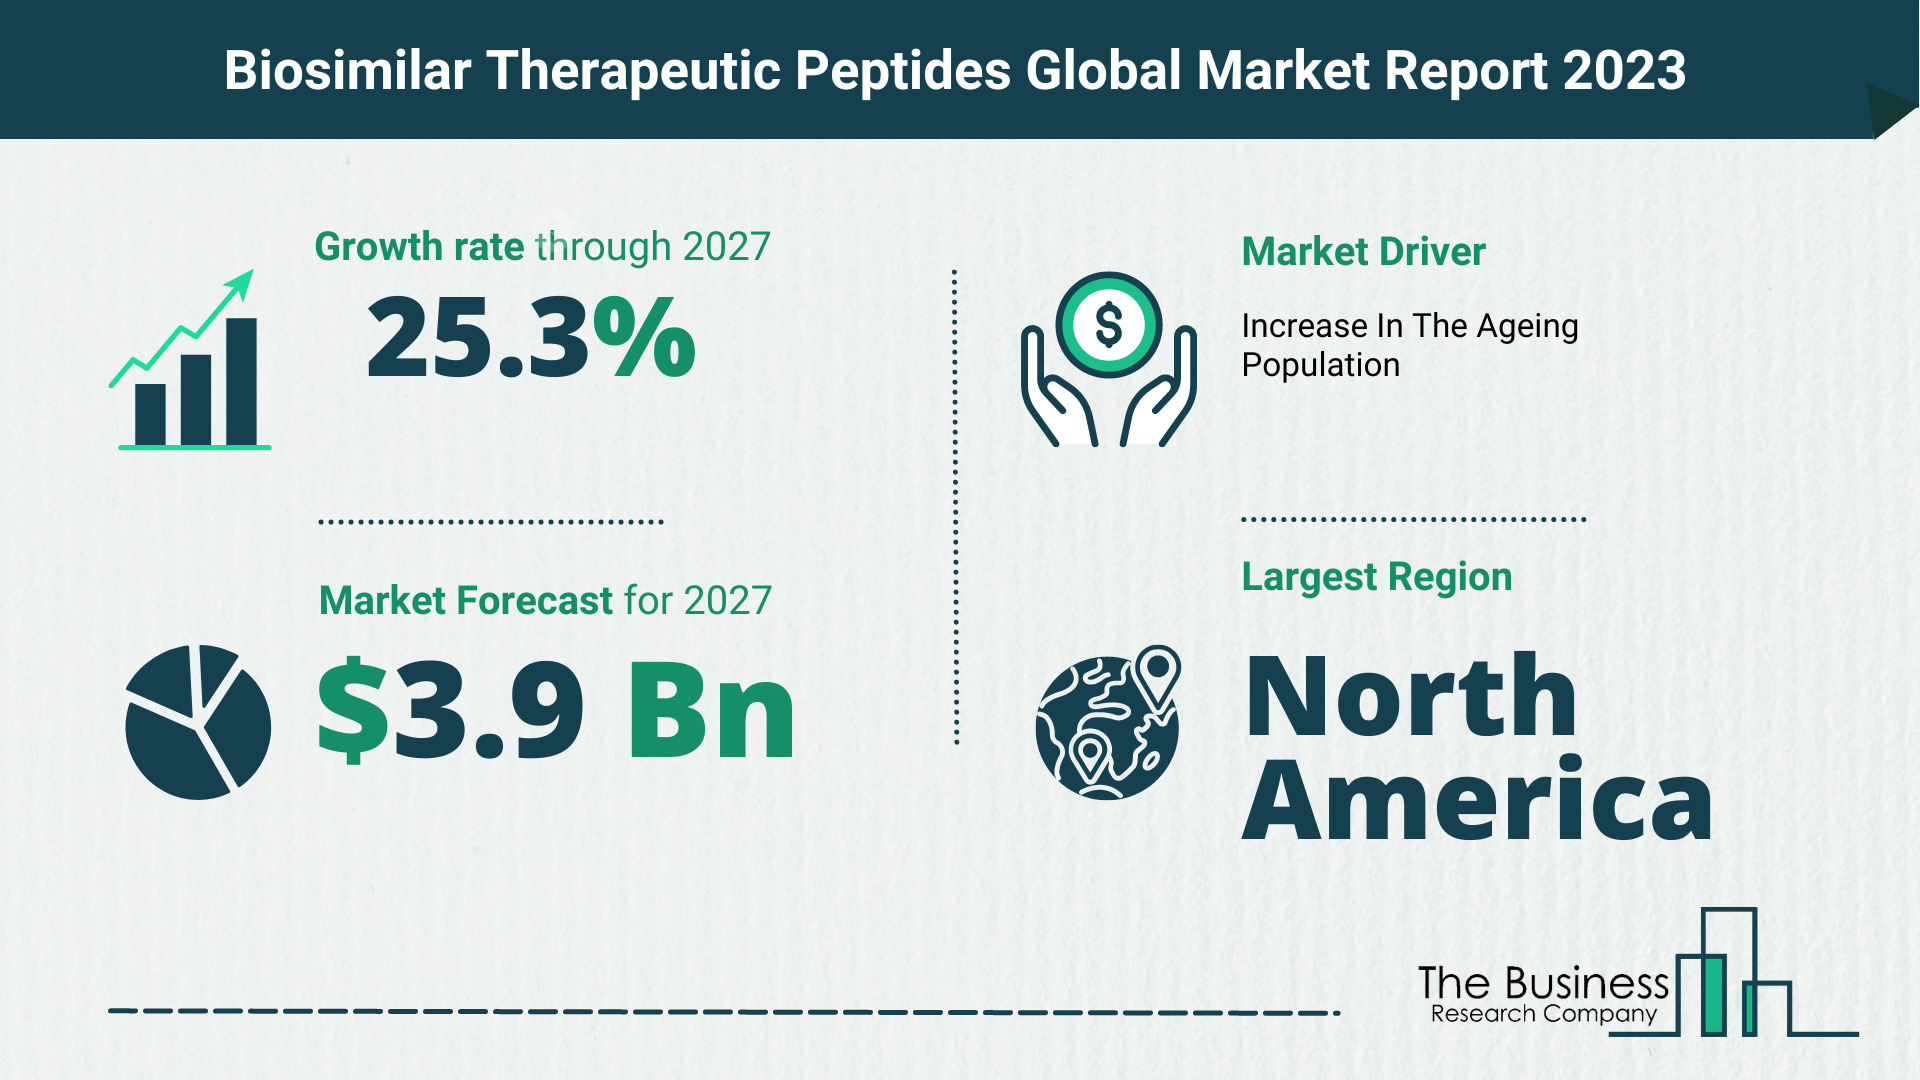 What Will The Biosimilar Therapeutic Peptides Market Look Like In 2023?